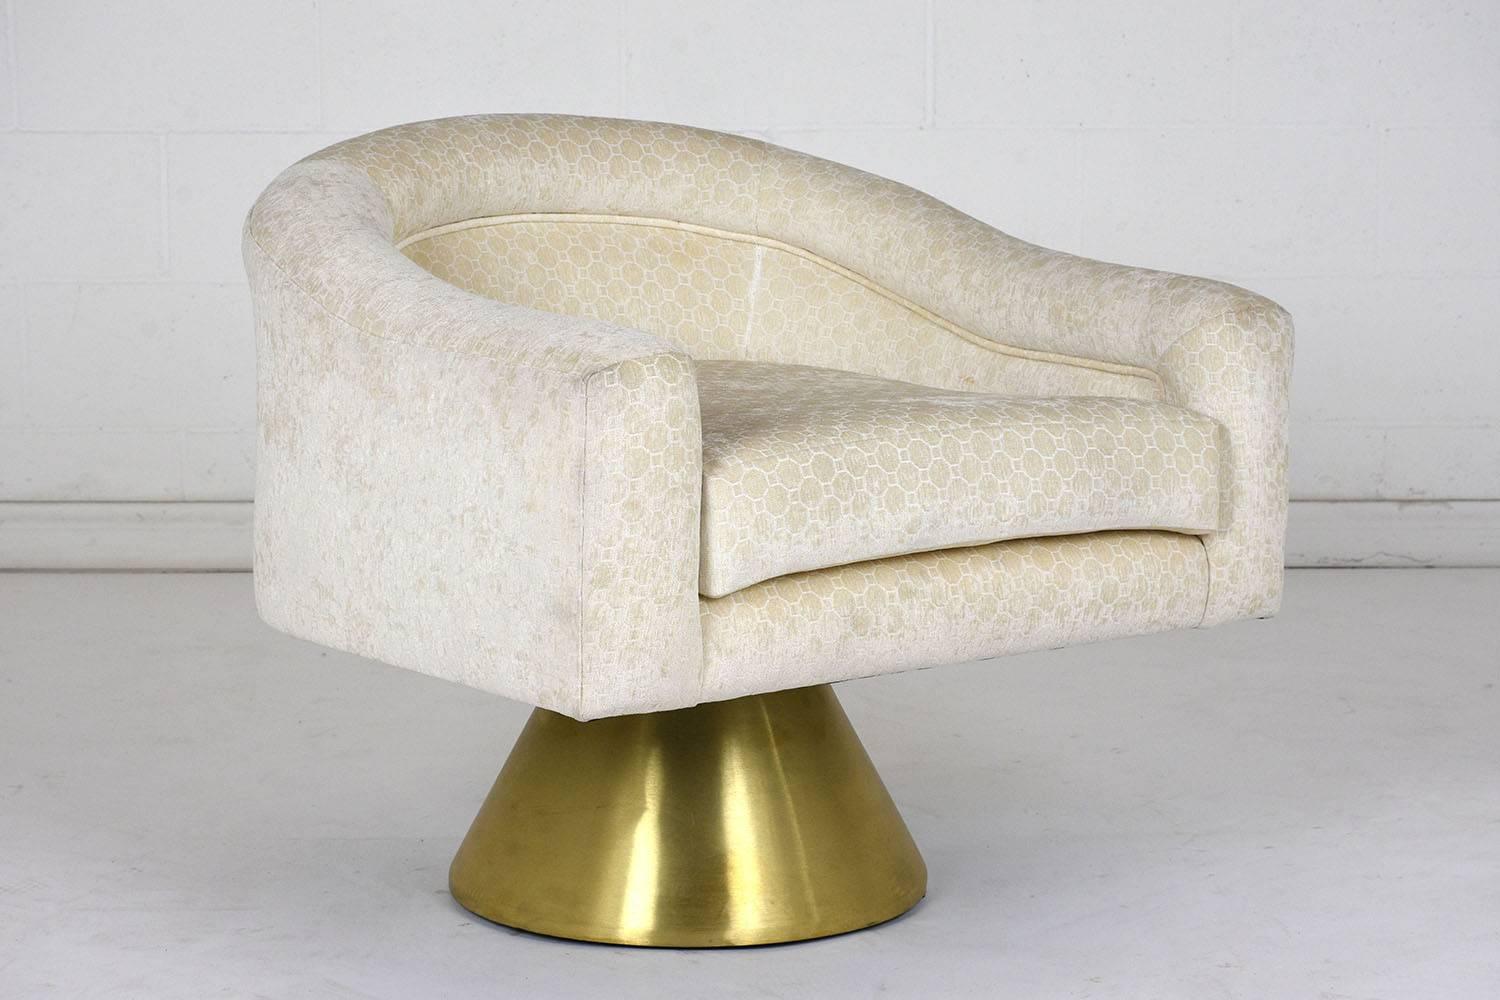 This 1960s Mid-Century Modern style swivel lounge chair is designed by Milo Baughman. The comfortable lounge chair has recently been professionally upholstered in an ivory color crushed velvet fabric with an octagon and square pattern. The fully